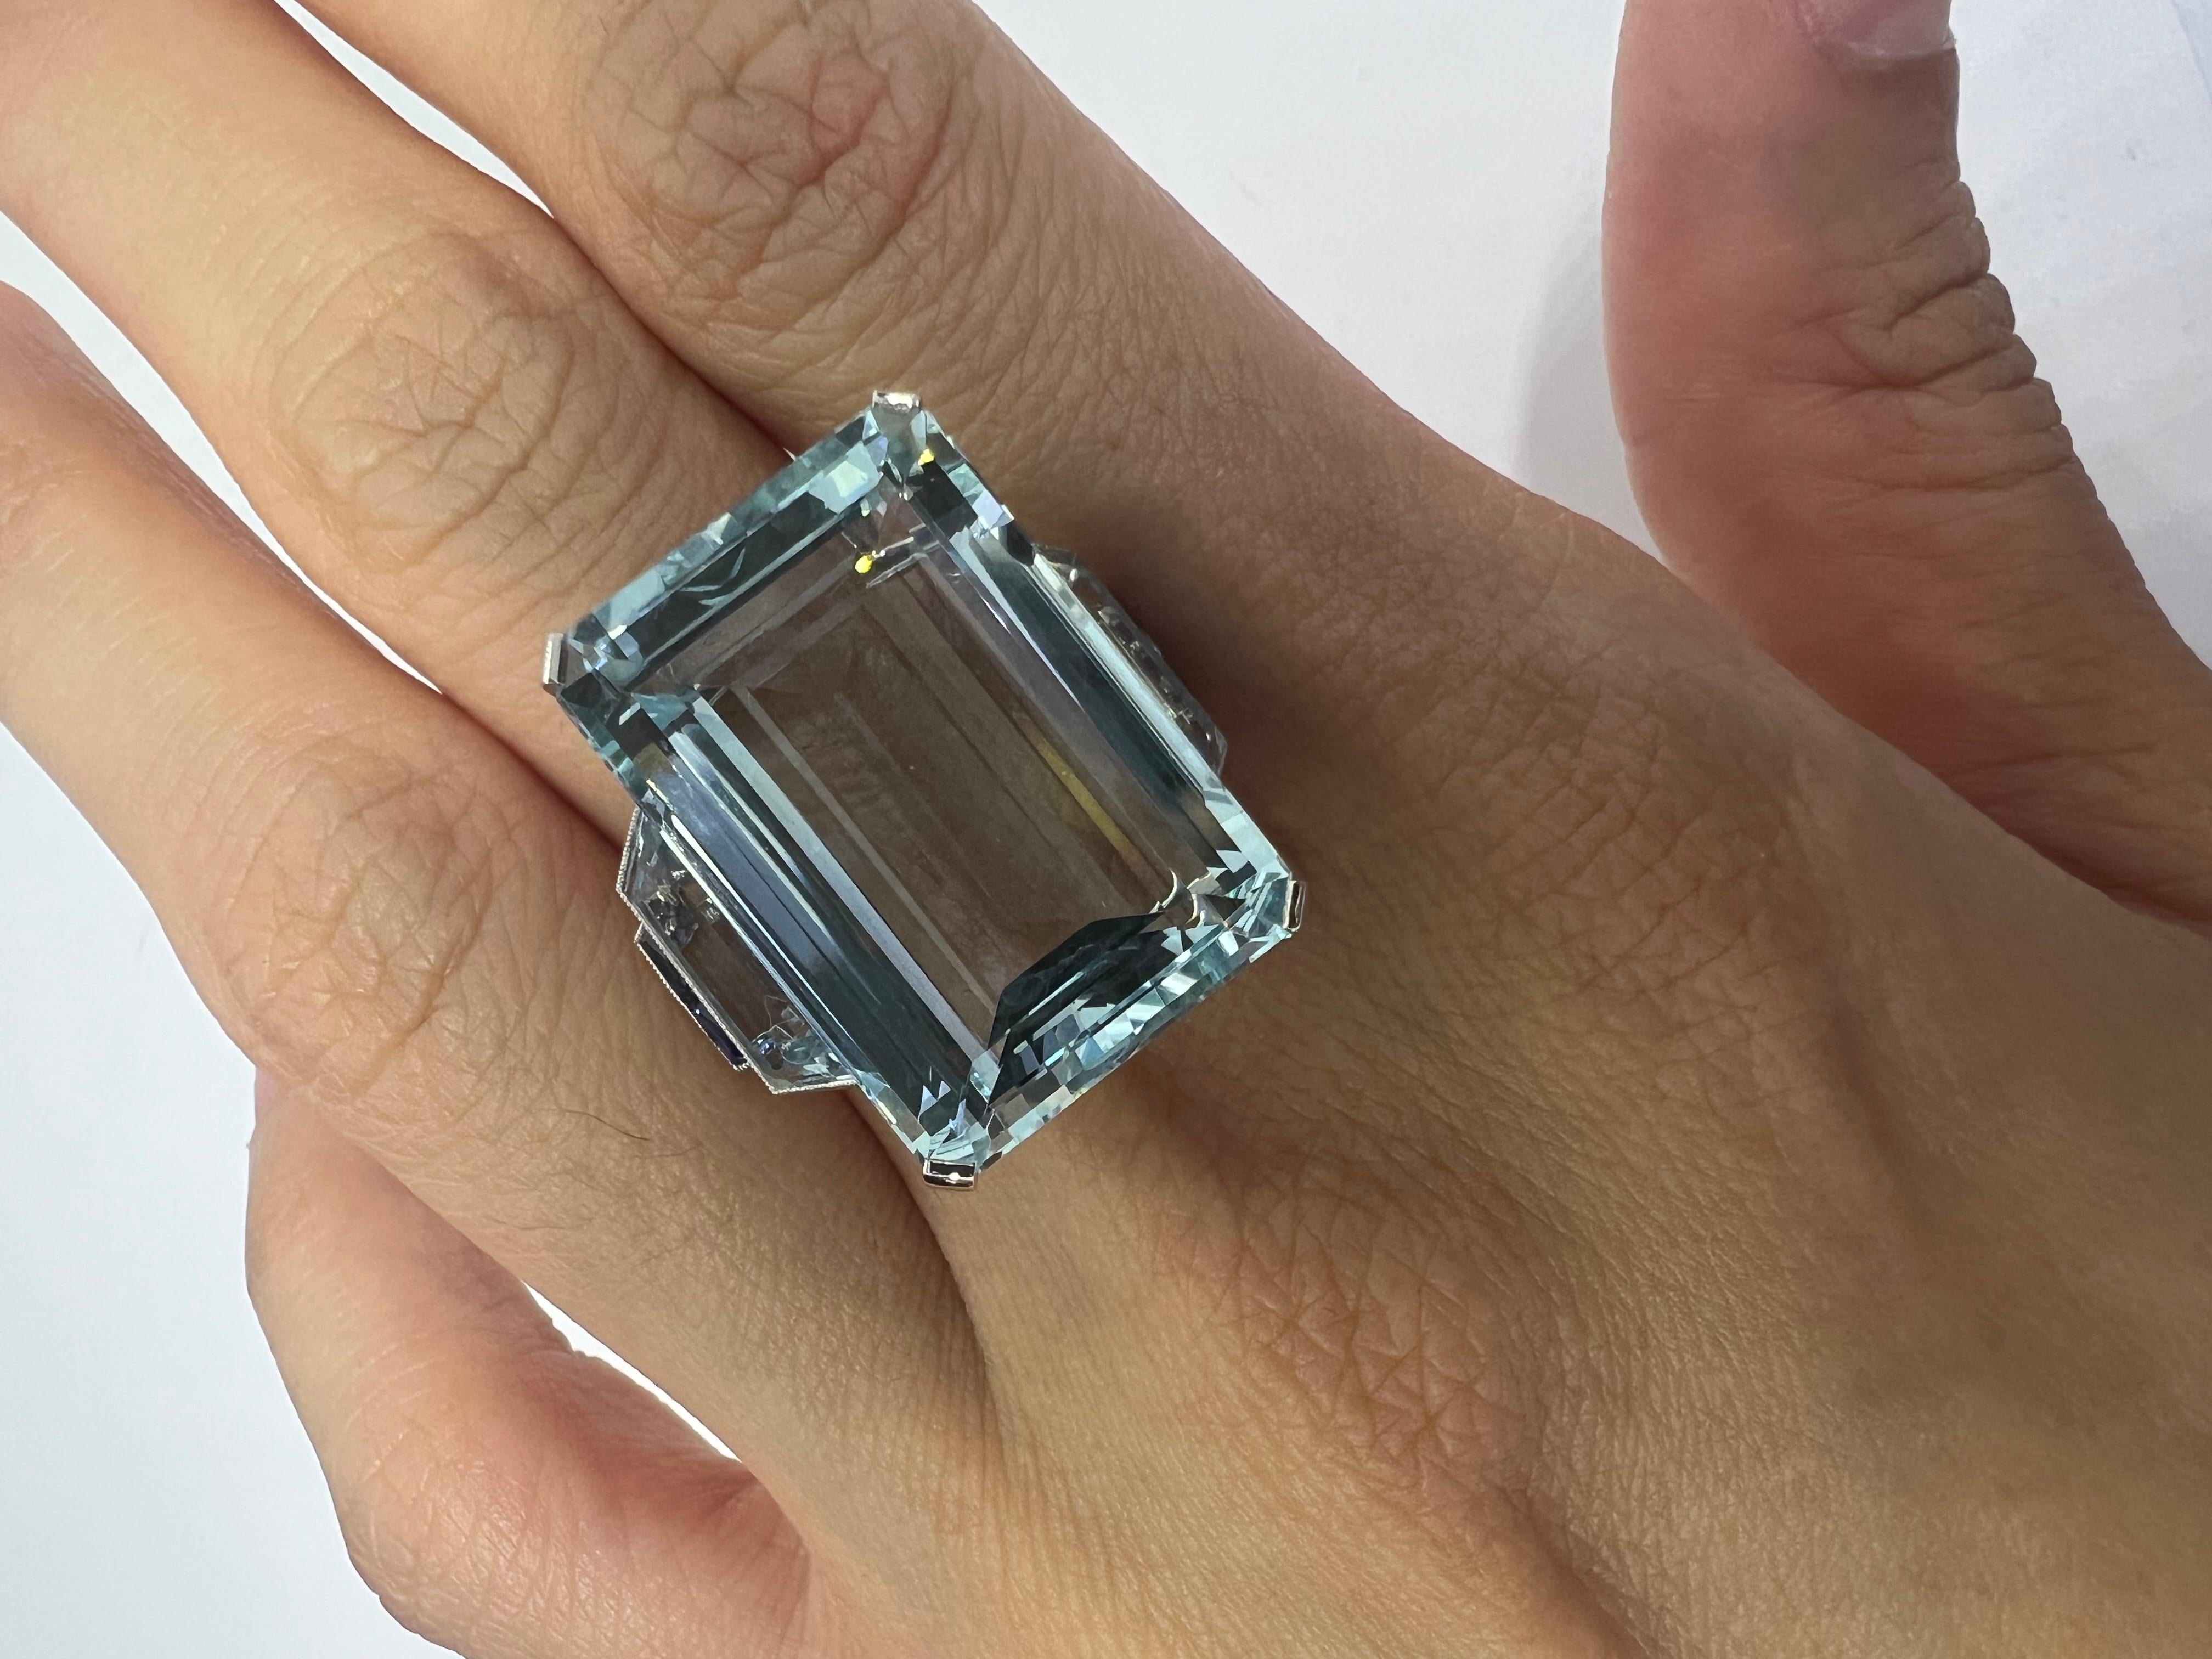 Platinum ring with 24.12 carat aquamarine, 0.27 carat diamond , 0.24 carat sapphire and 0.27 carat aquamarine.

Sophia D by Joseph Dardashti LTD has been known worldwide for 35 years and are inspired by classic Art Deco design that merges with